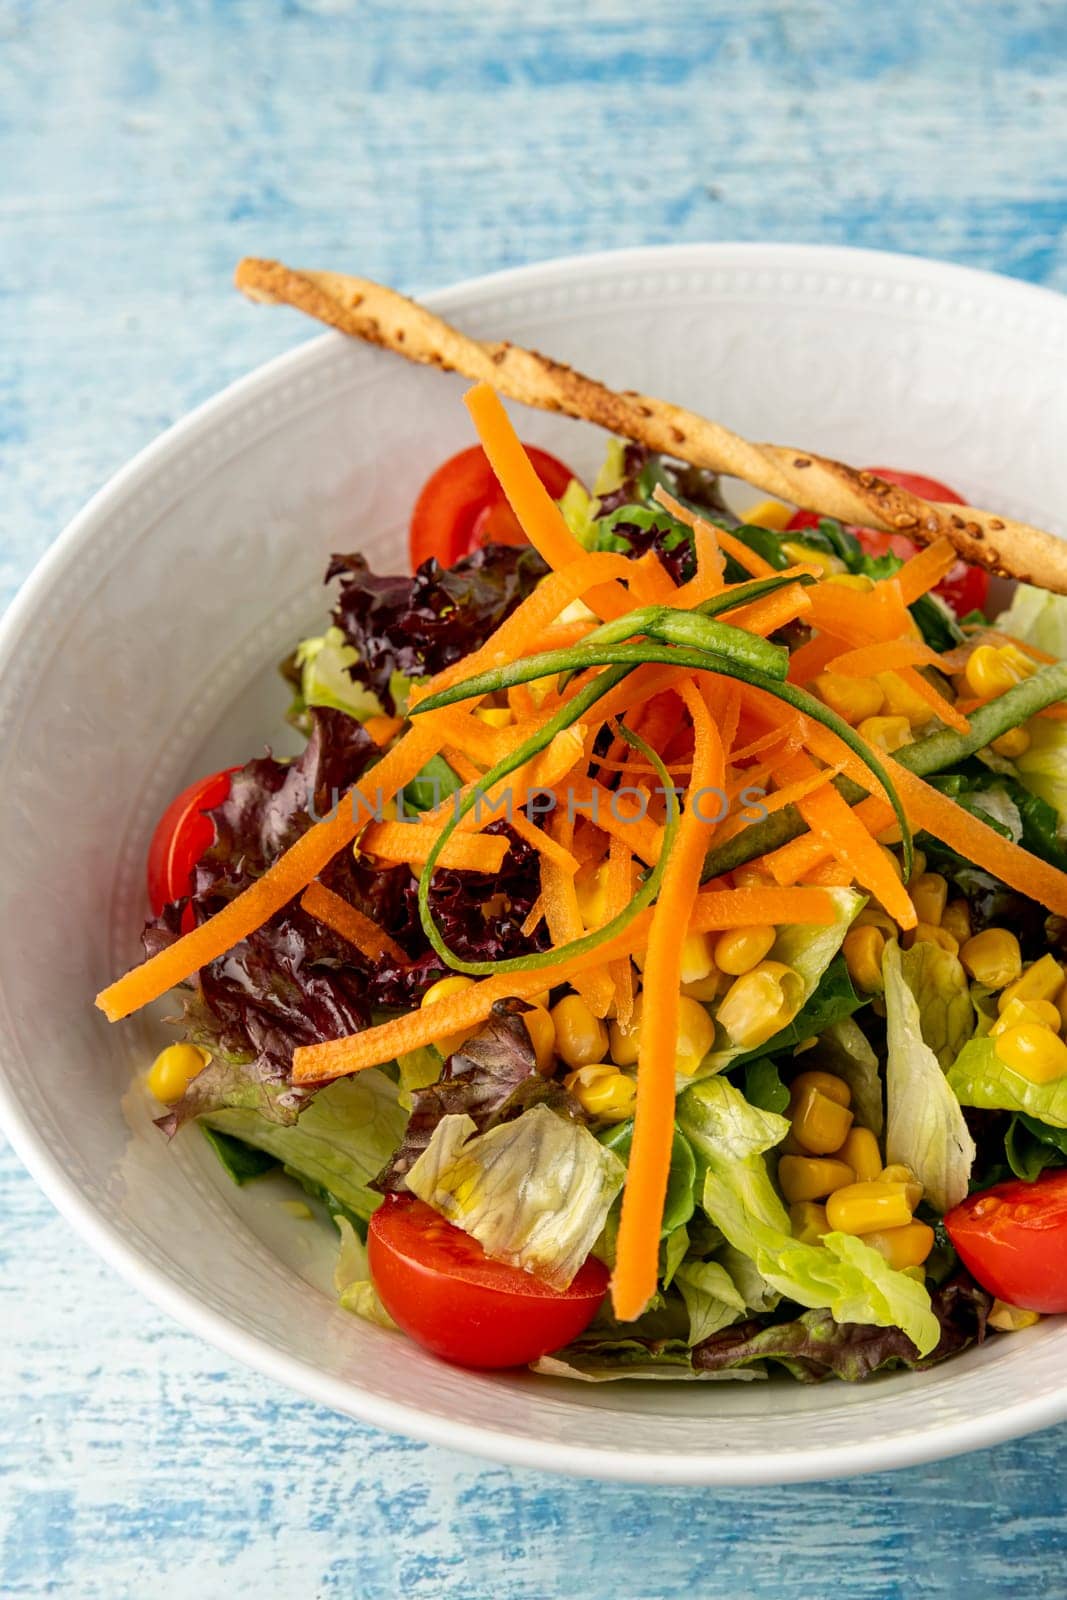 Healthy mixed salad in white bowl on wooden table. Mediterranean salad